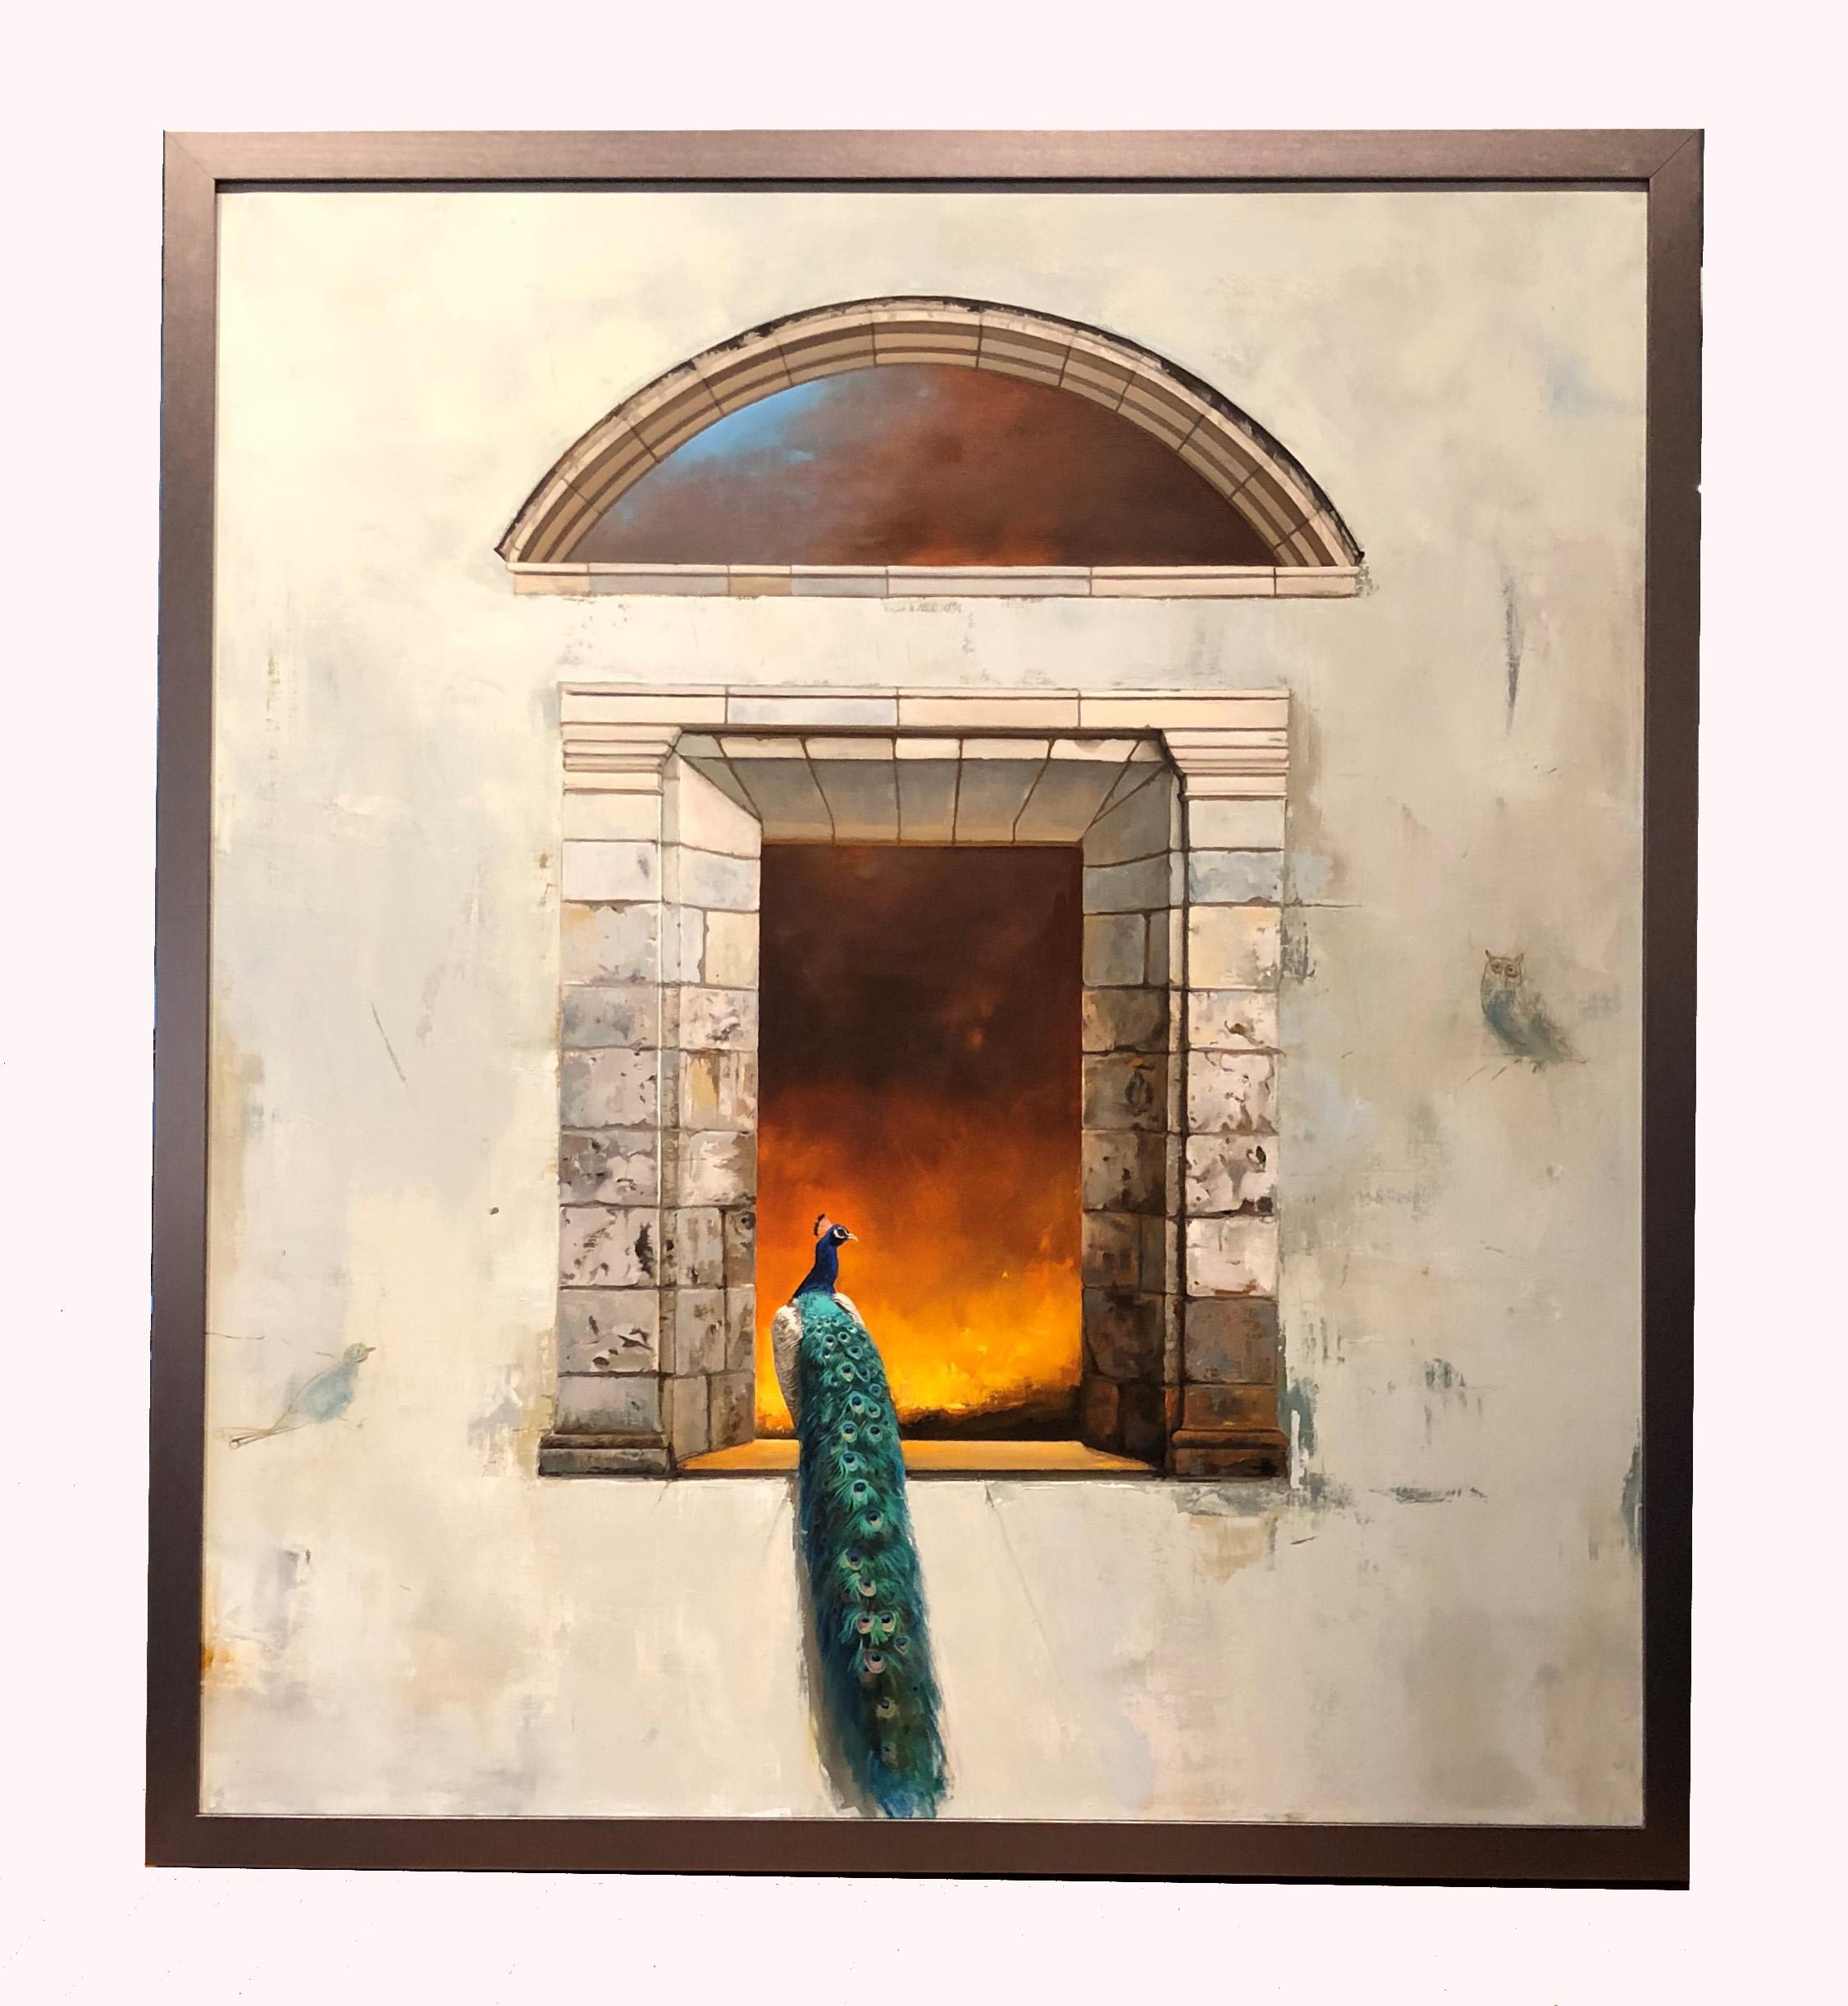 Inferno - Classic Architectural Stone Window with Peacock & Fire Scene - Contemporary Painting by Carol Pylant